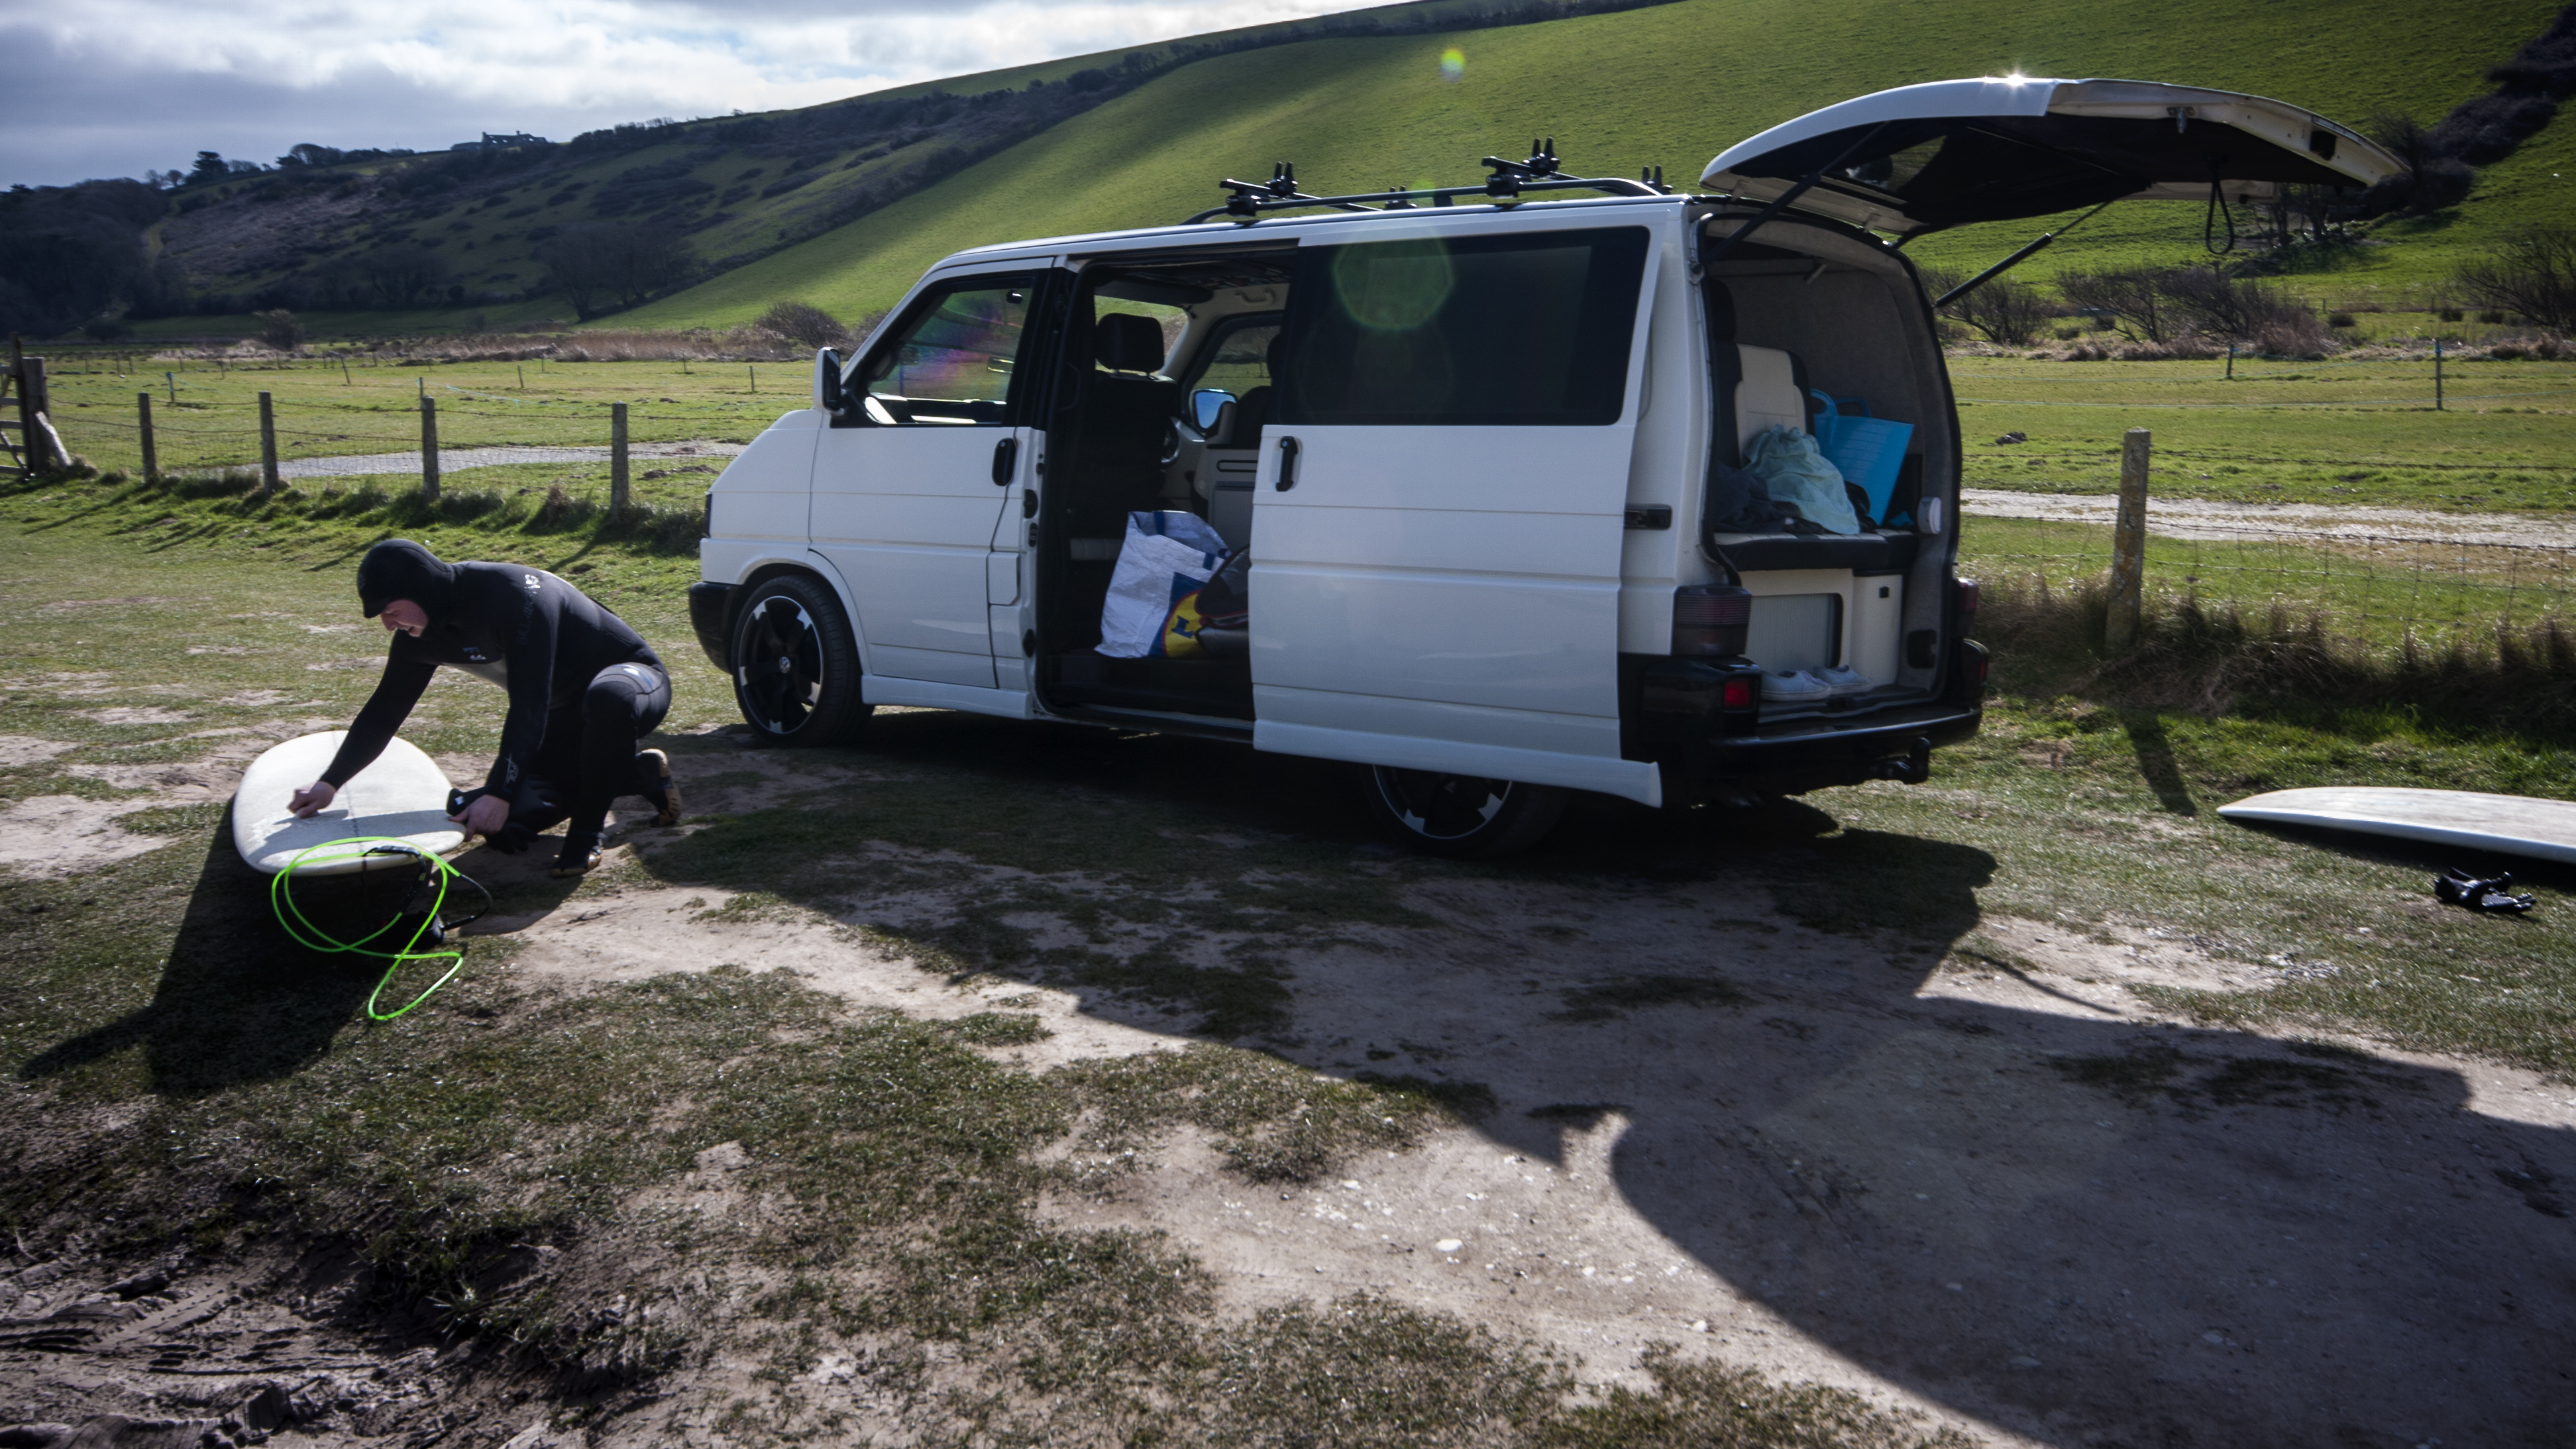 Parked up and getting everything ready for a surf